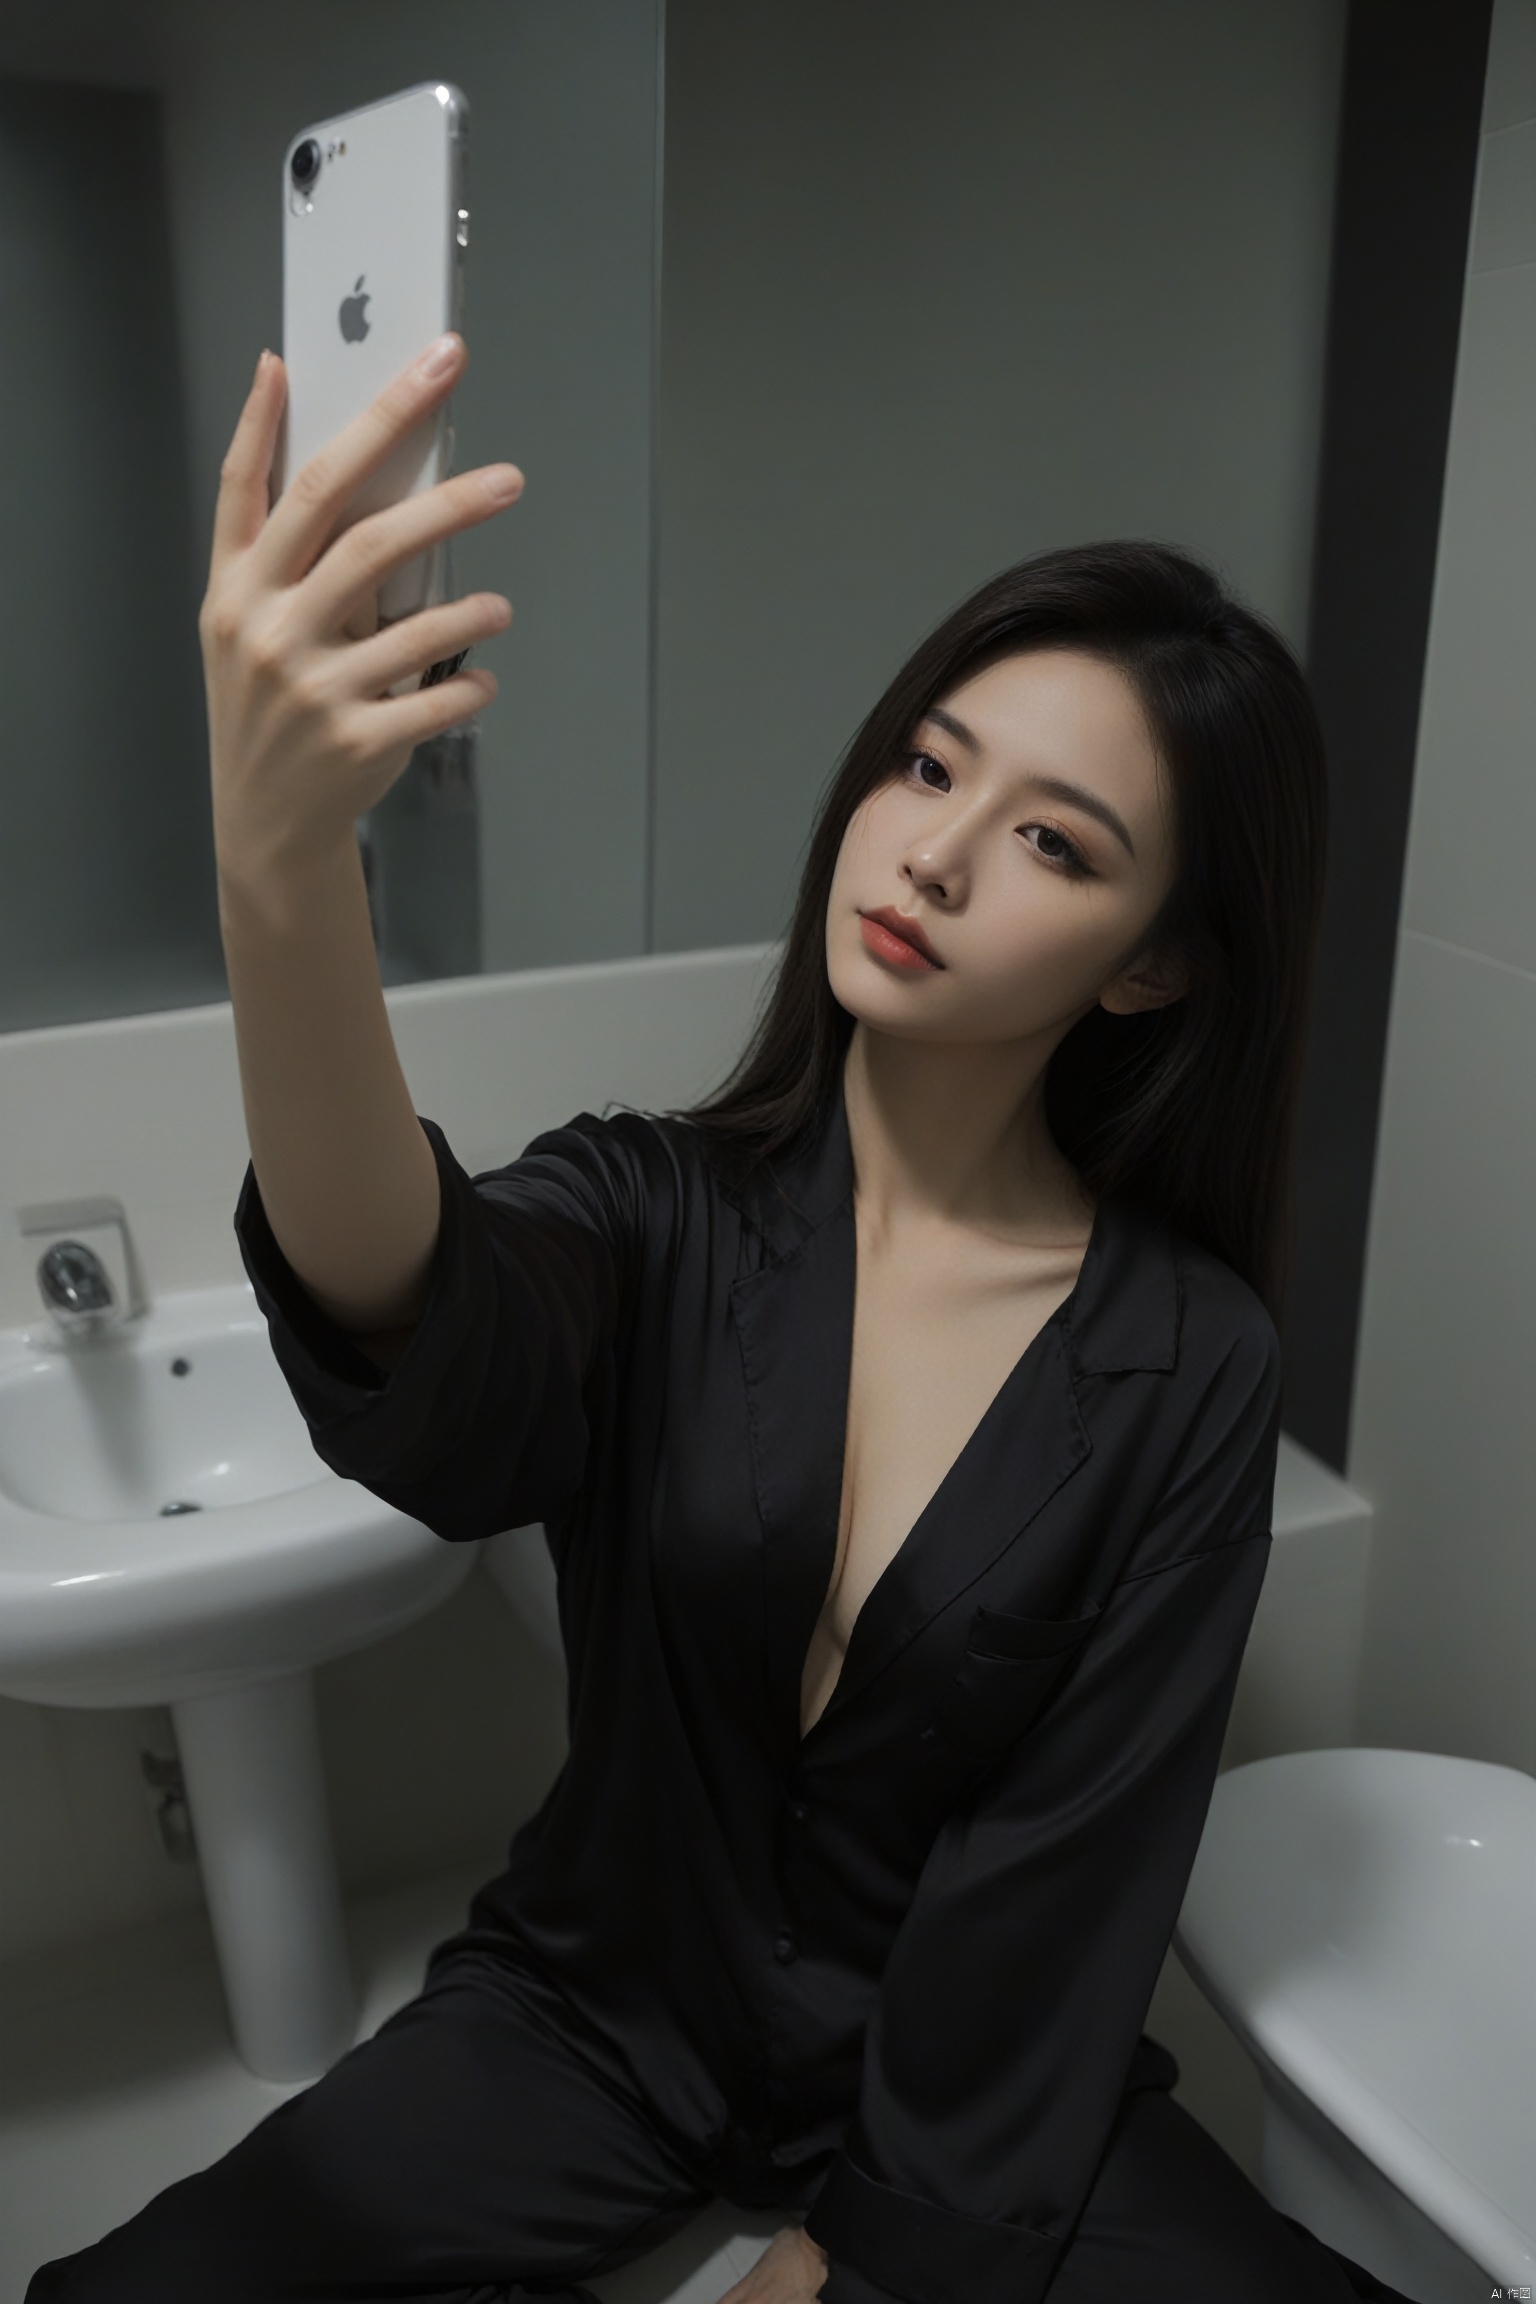  Wearing black pajamas, in the bathroom with dim lighting and strong realism, taking selfies